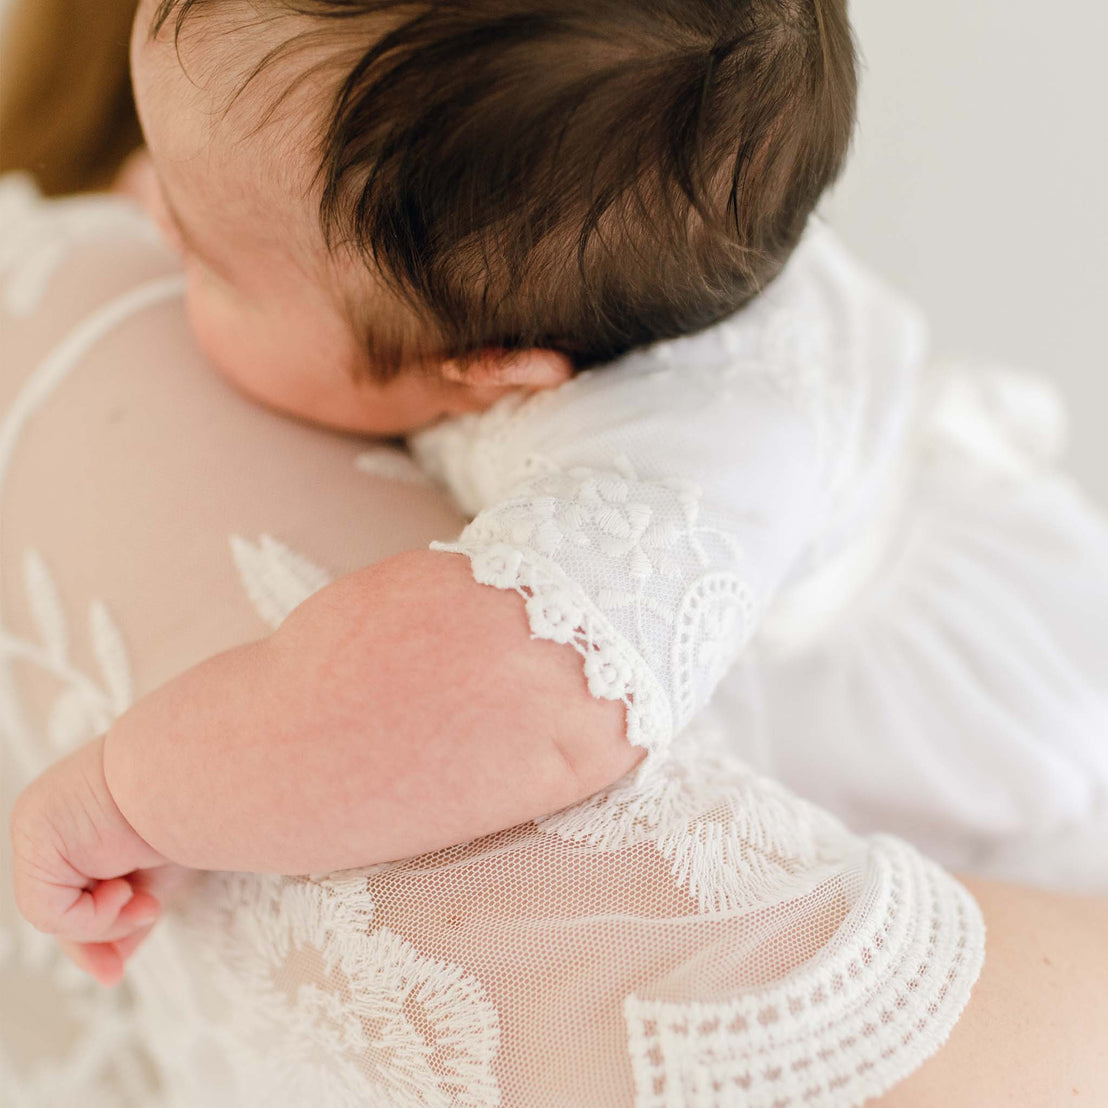 A close-up image of a baby with dark hair being gently held against a mother's shoulder, who is wearing the Eliza Blessing Gown & Bonnet. The focus is on the baby’s tiny hand and delicate textures.